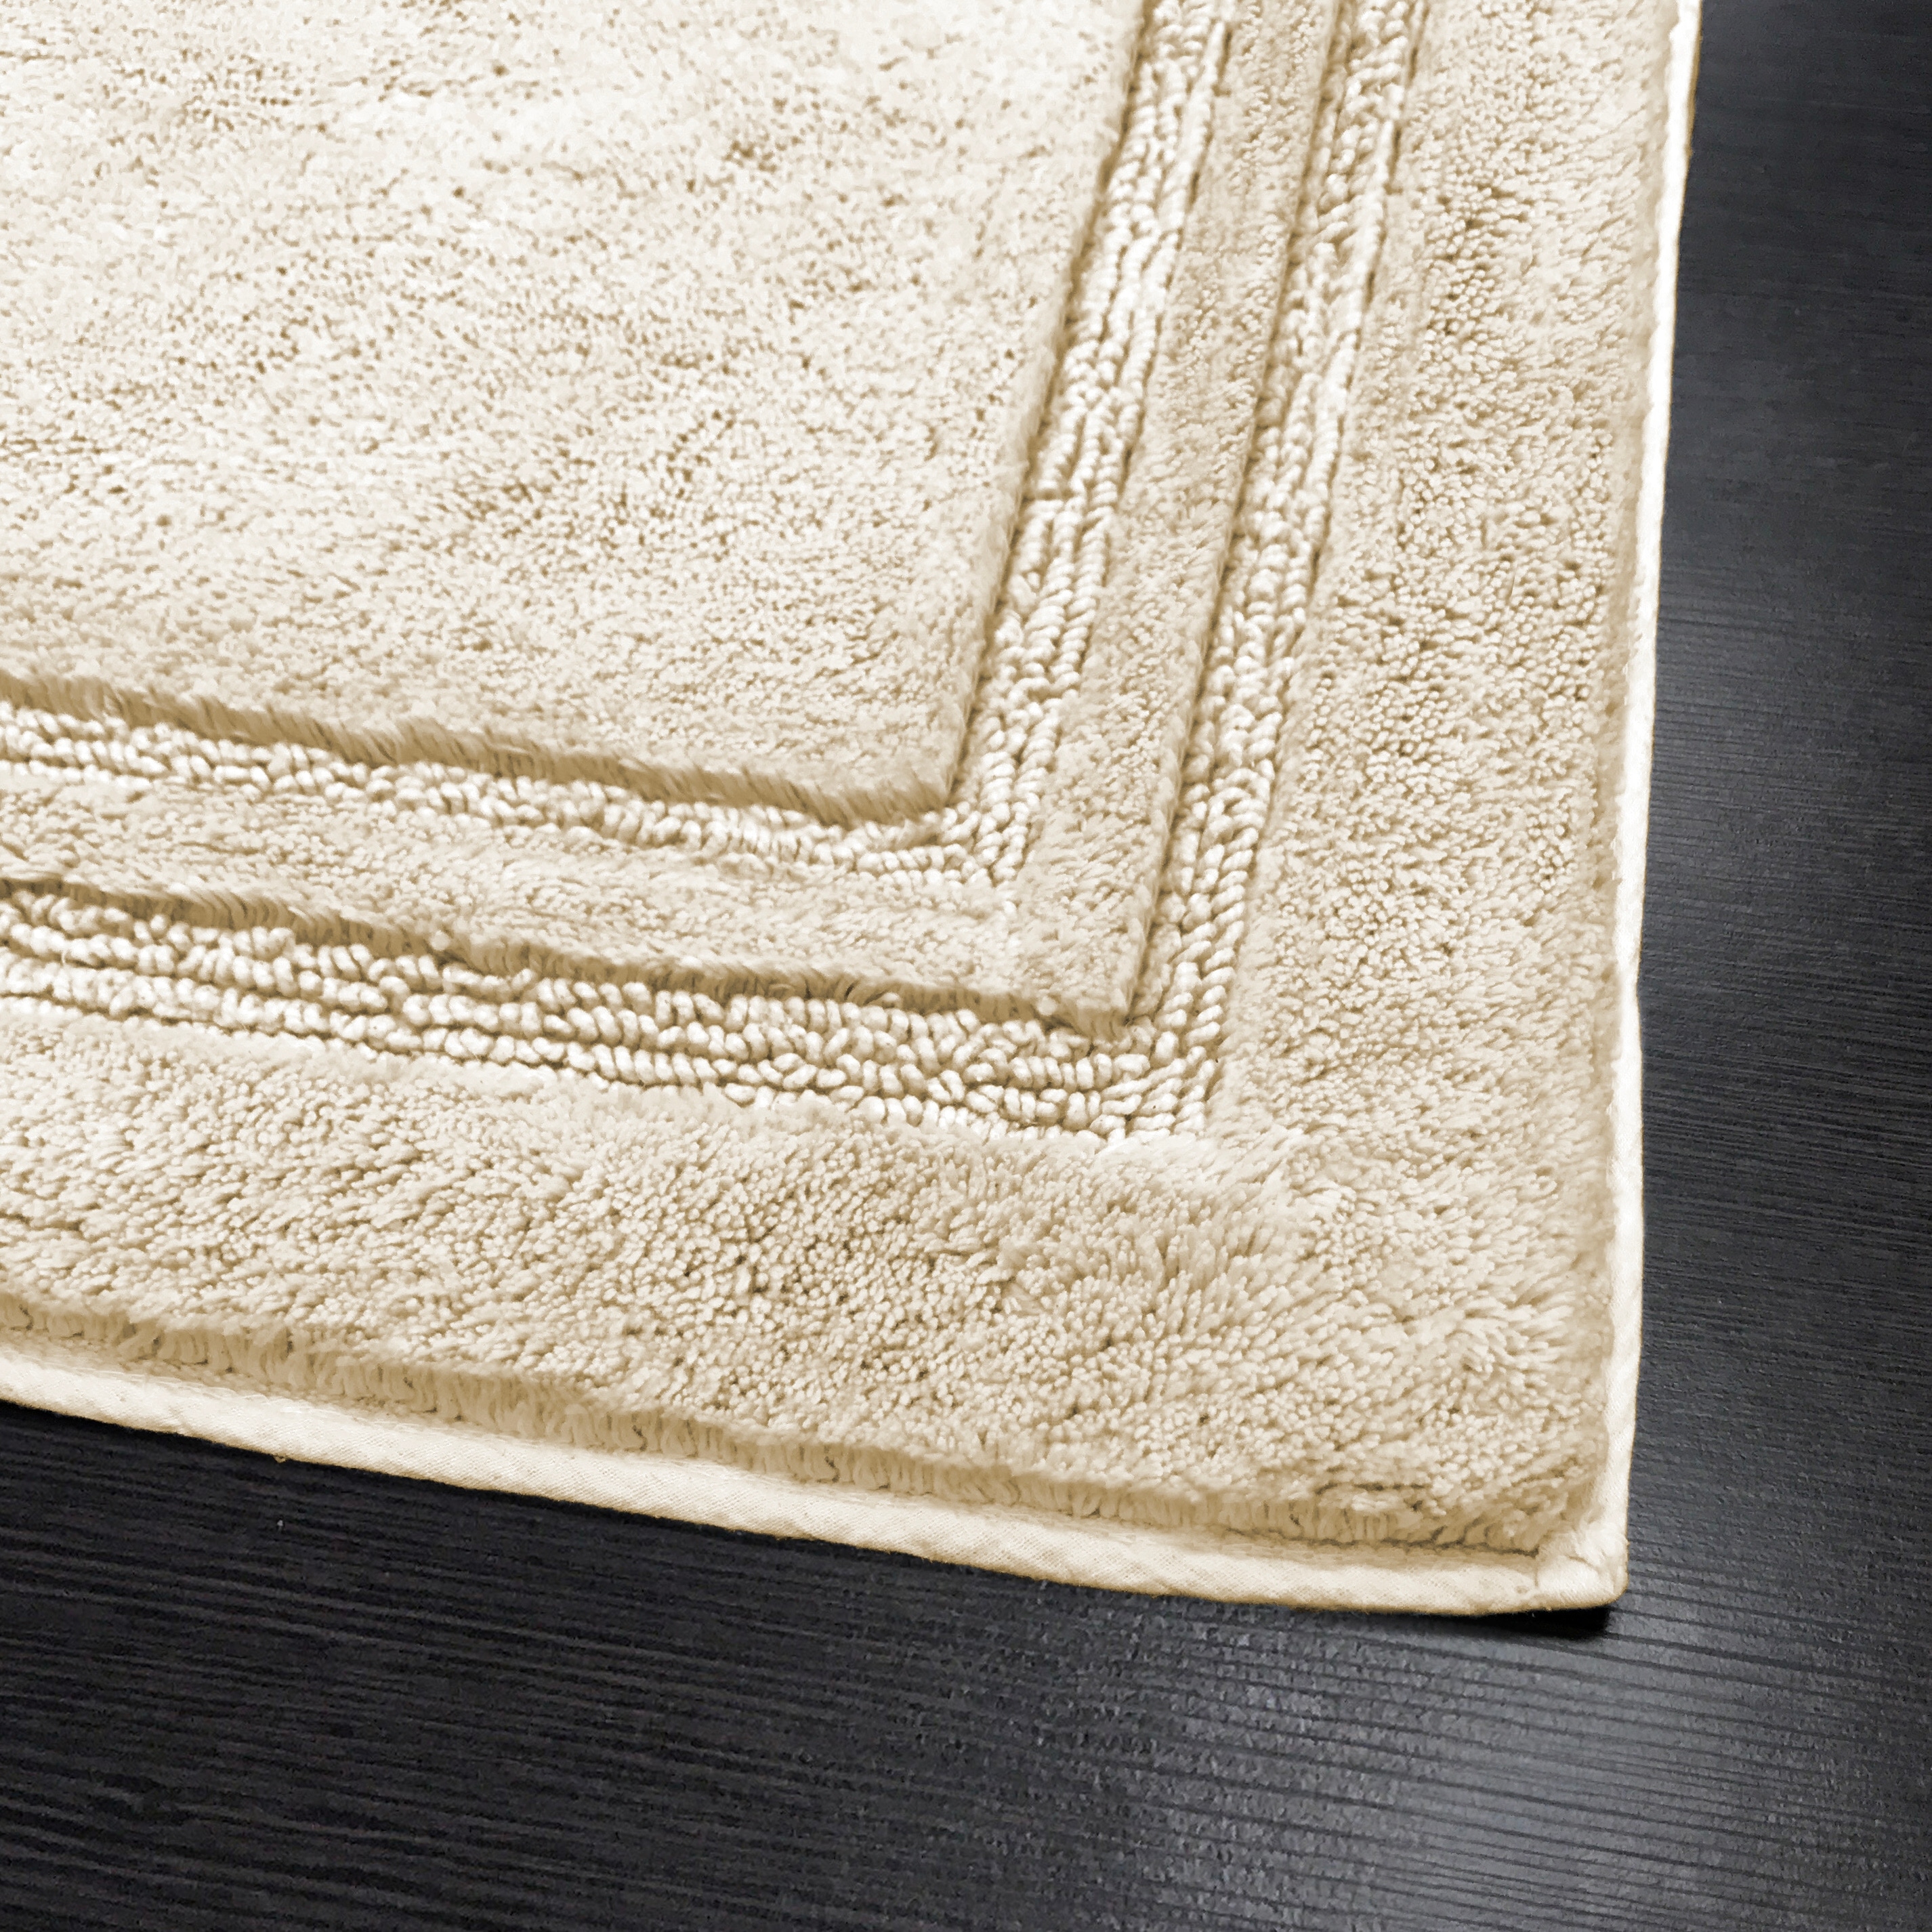 The Holiday Aisle® Bath Rug with Non-Slip Backing